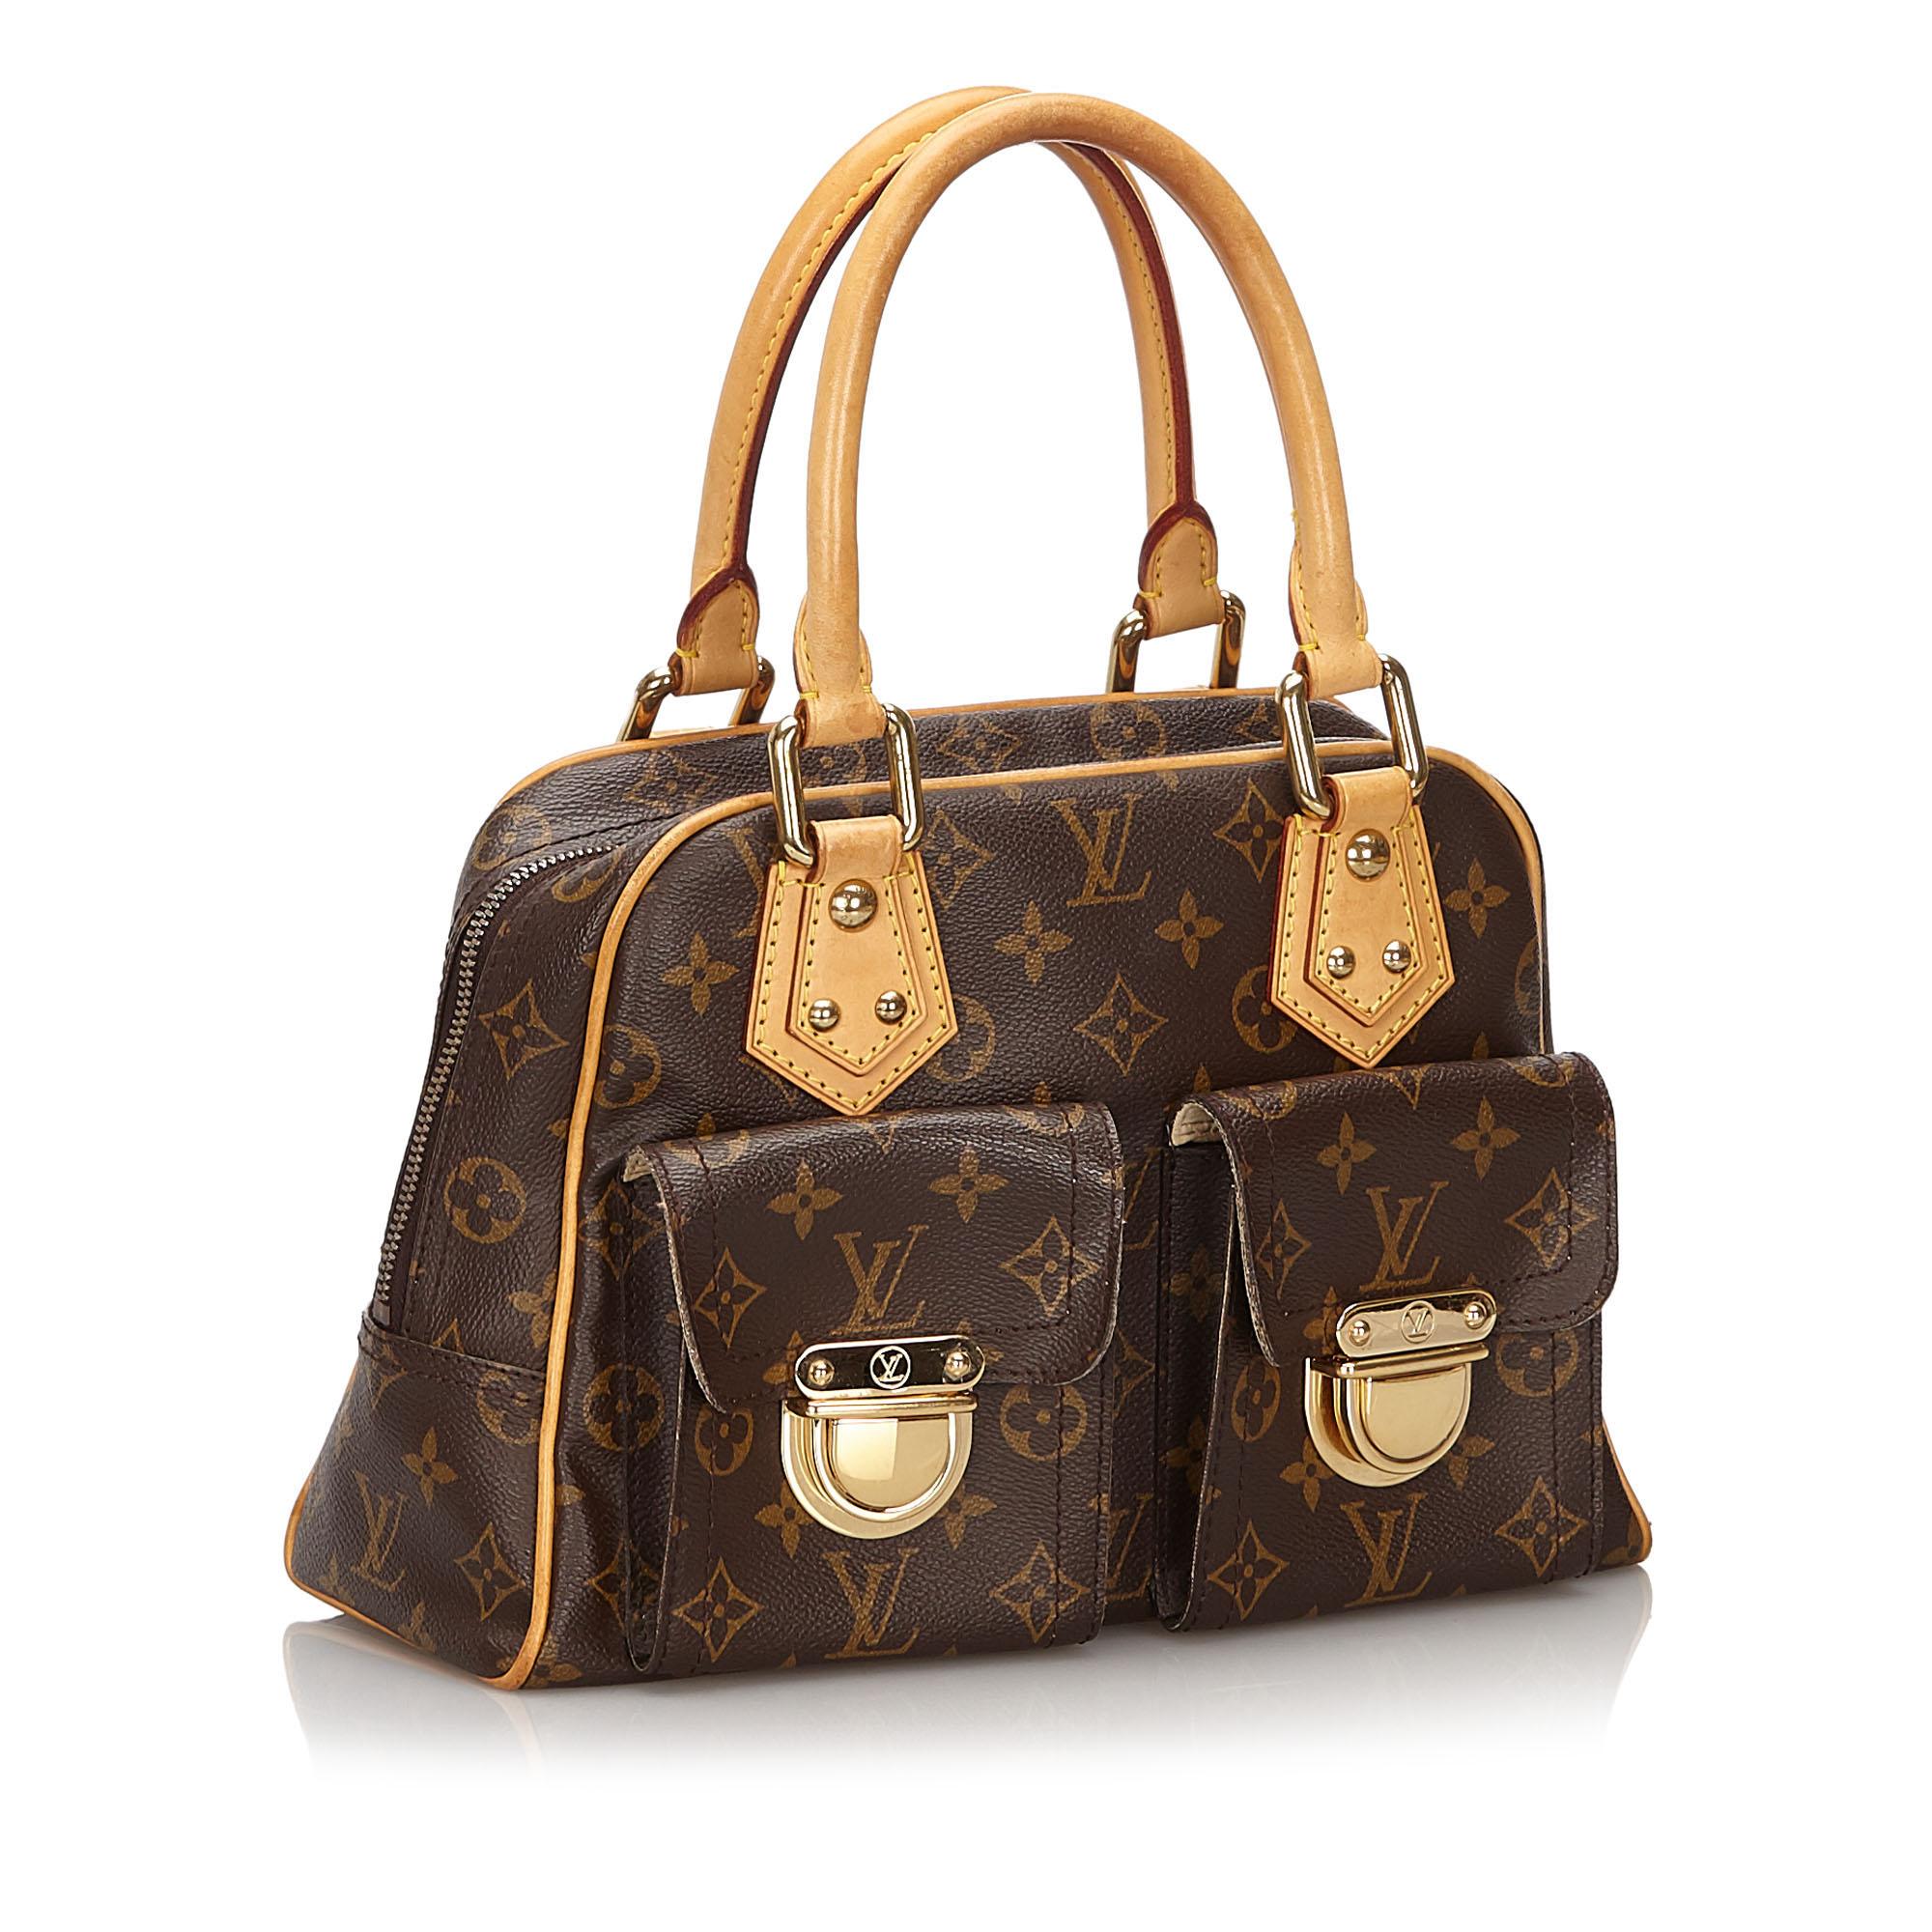 The Manhattan PM features a monogram canvas body, rolled leather handles, exterior flap pockets with gold-tone hardware and buckle closures, a top zip closure, and an interior slip pocket. It carries as AB condition rating.

Inclusions: 
Dust